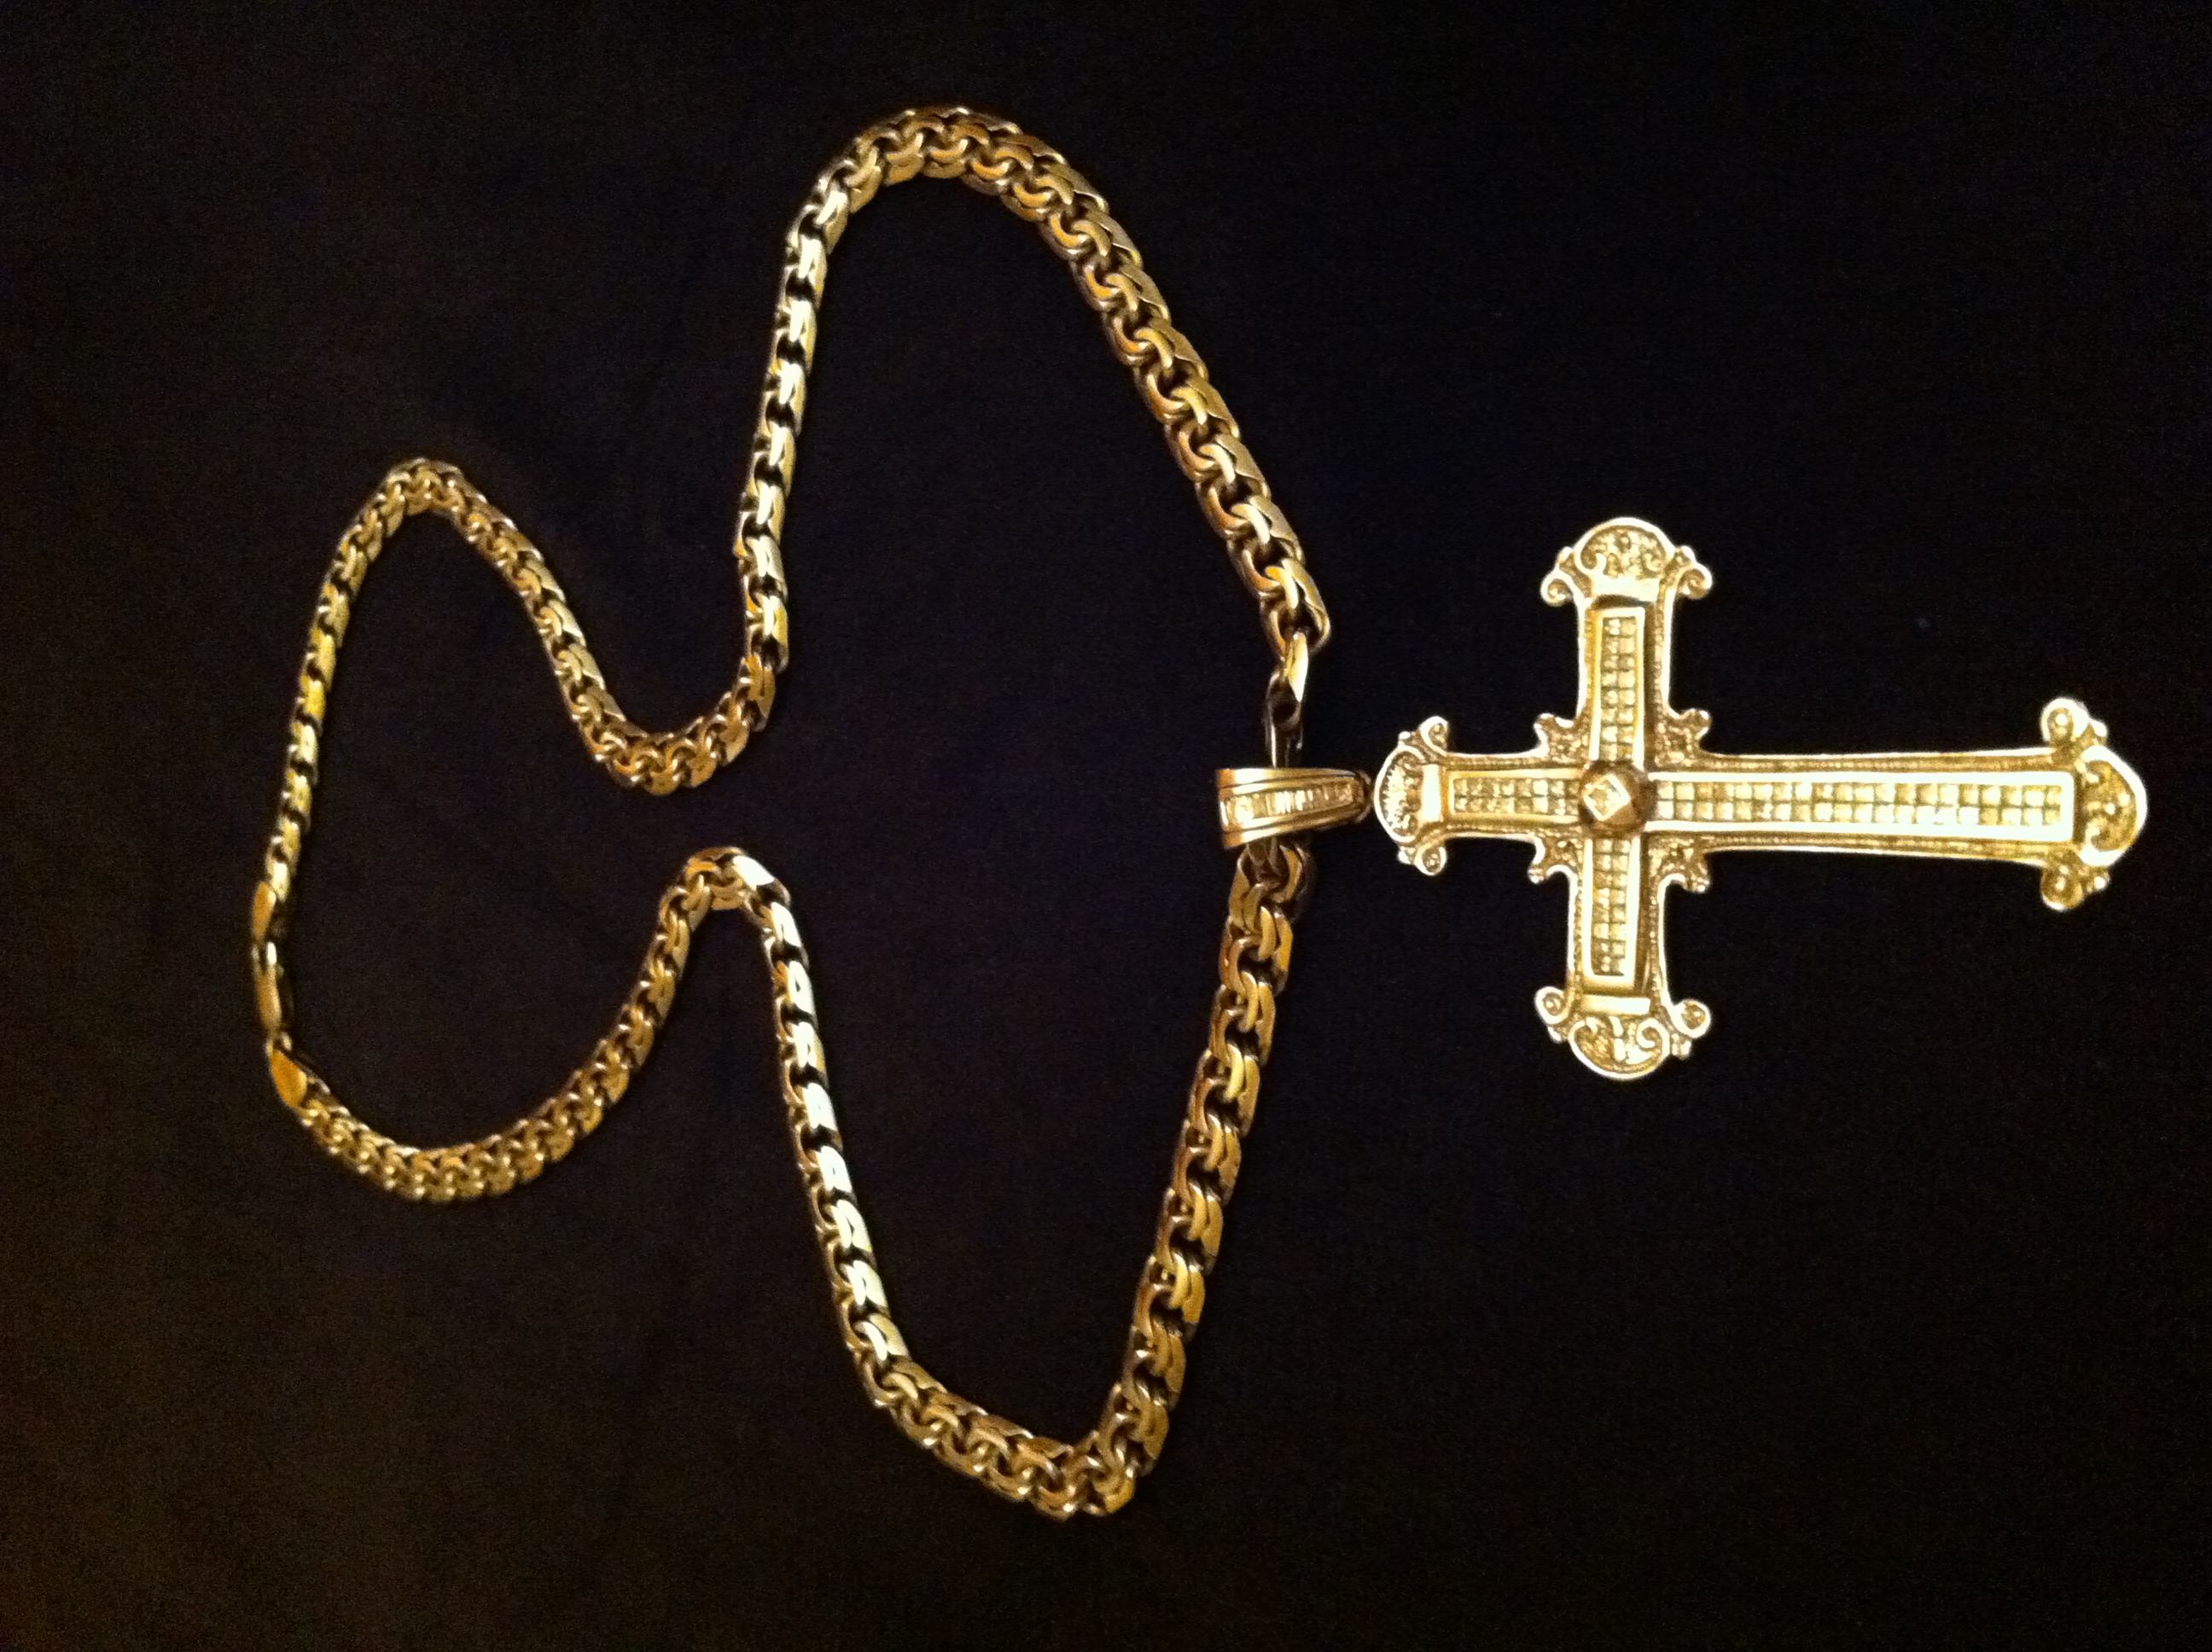 Mens Gold Cross Necklace And Chain Wallpaper Free